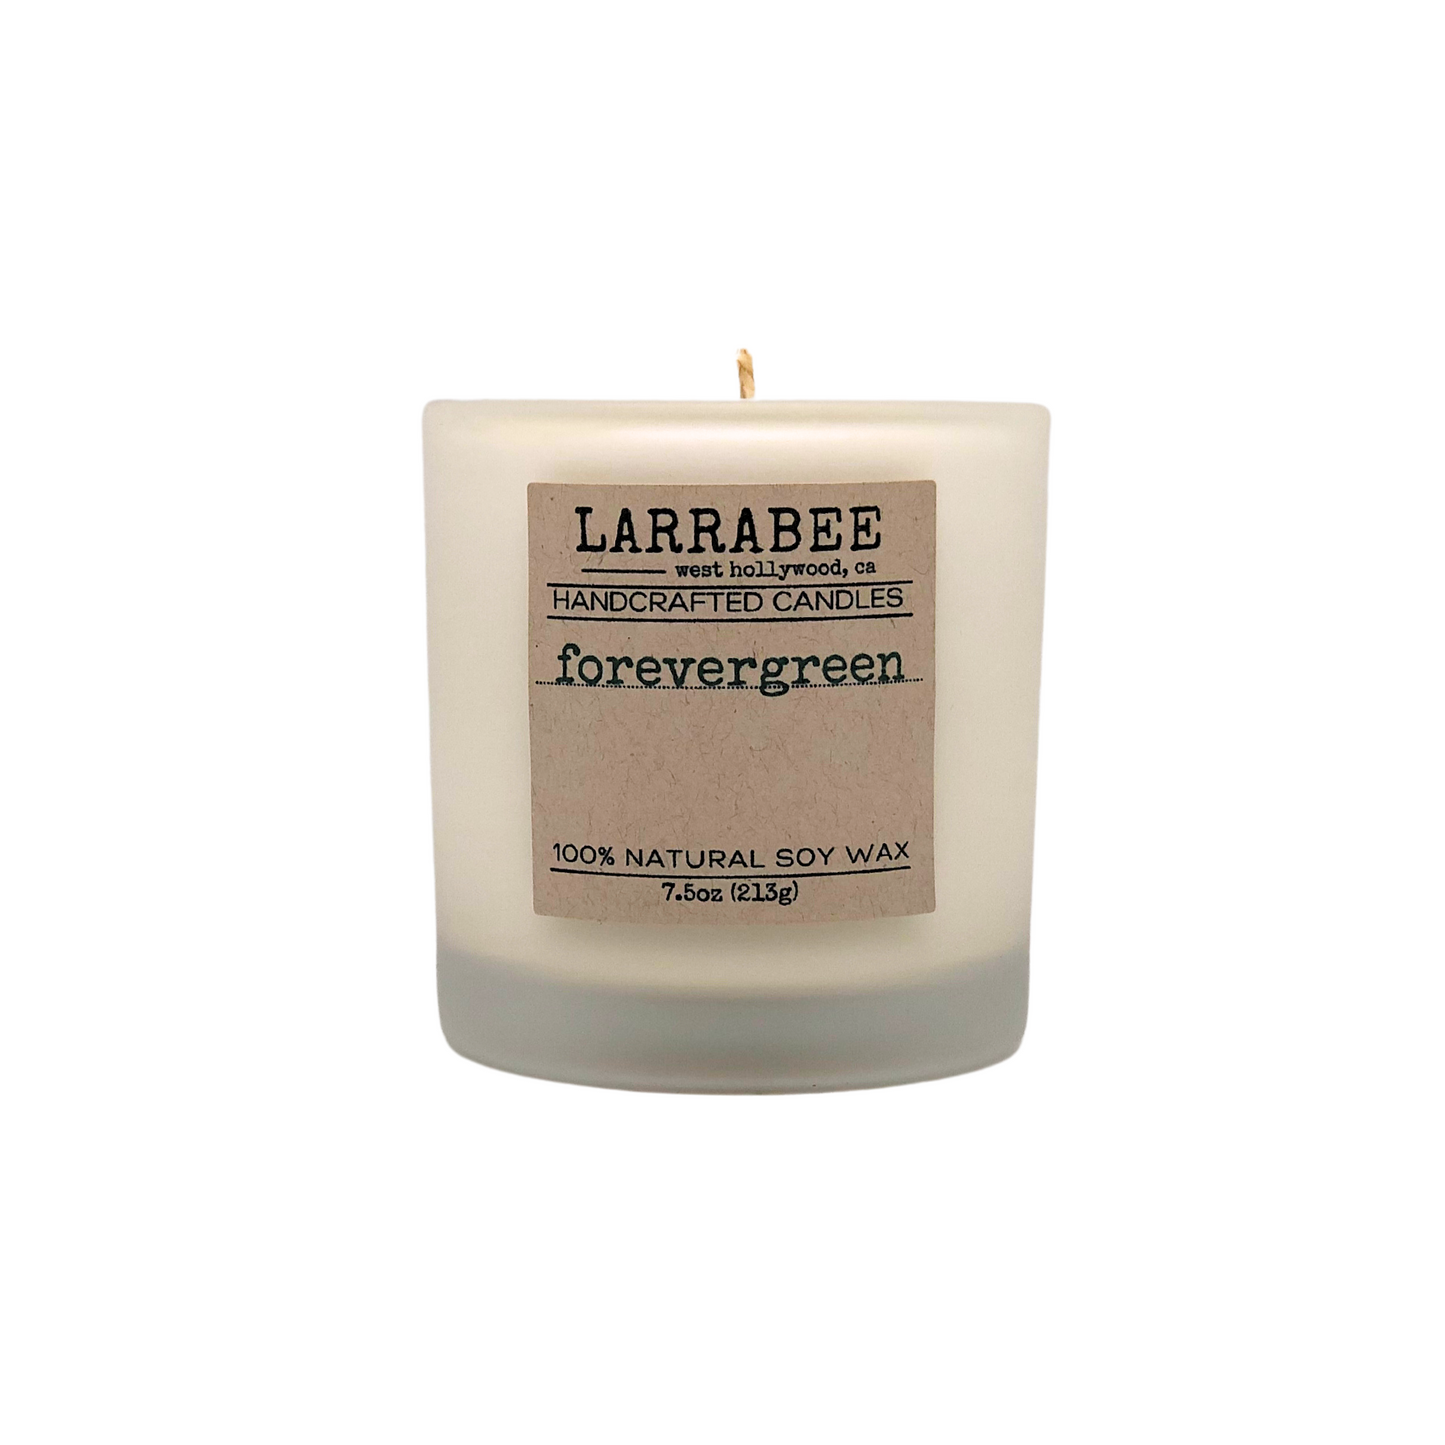 Forevergreen handcrafted candle